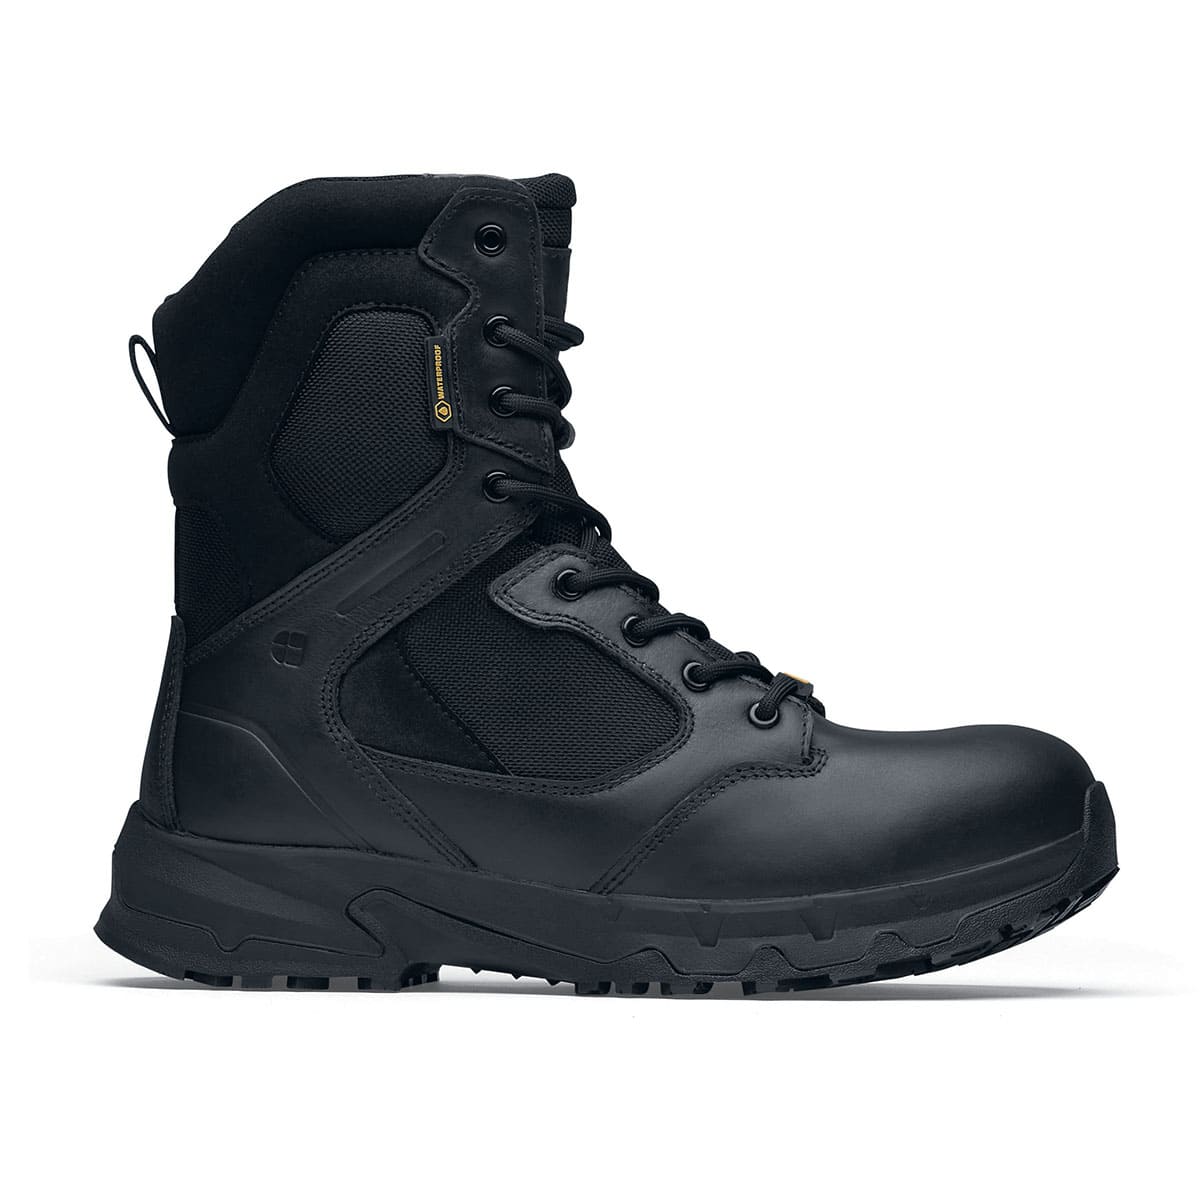 The Defence High from Shoes For Crews are waterproof, slip-resistant safety boots, seen from the right.